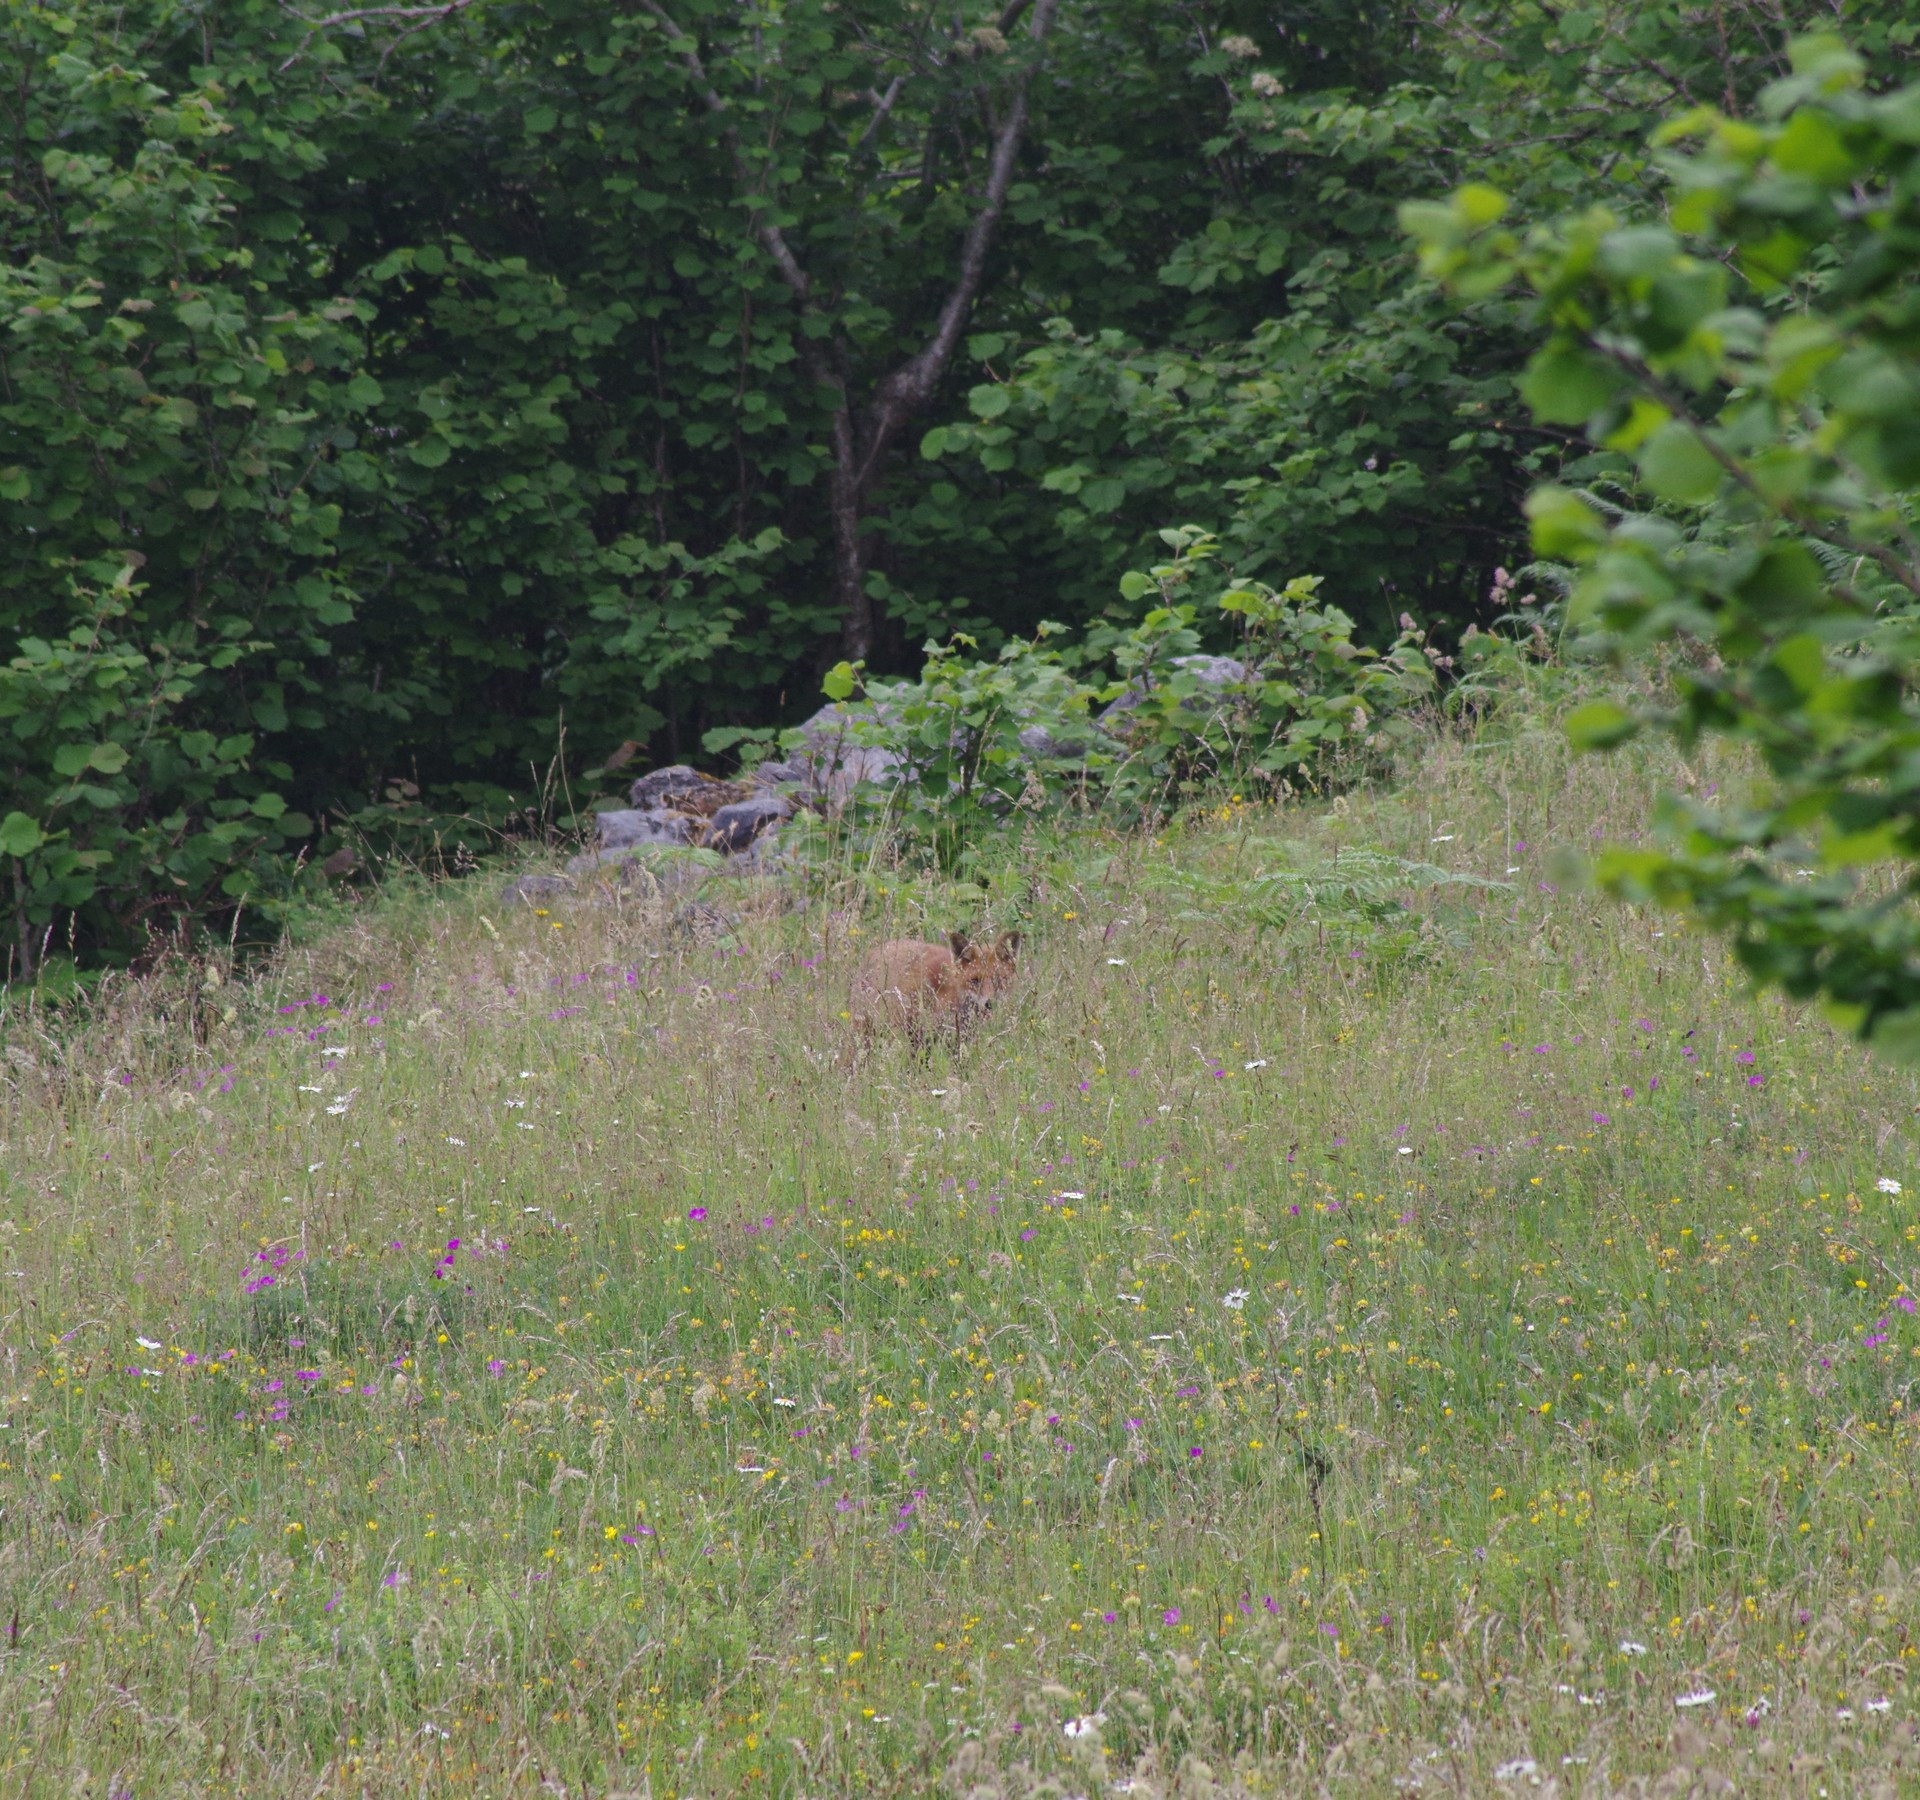 A photograph of a fox semi-hidden among the tall grass and wildflowers